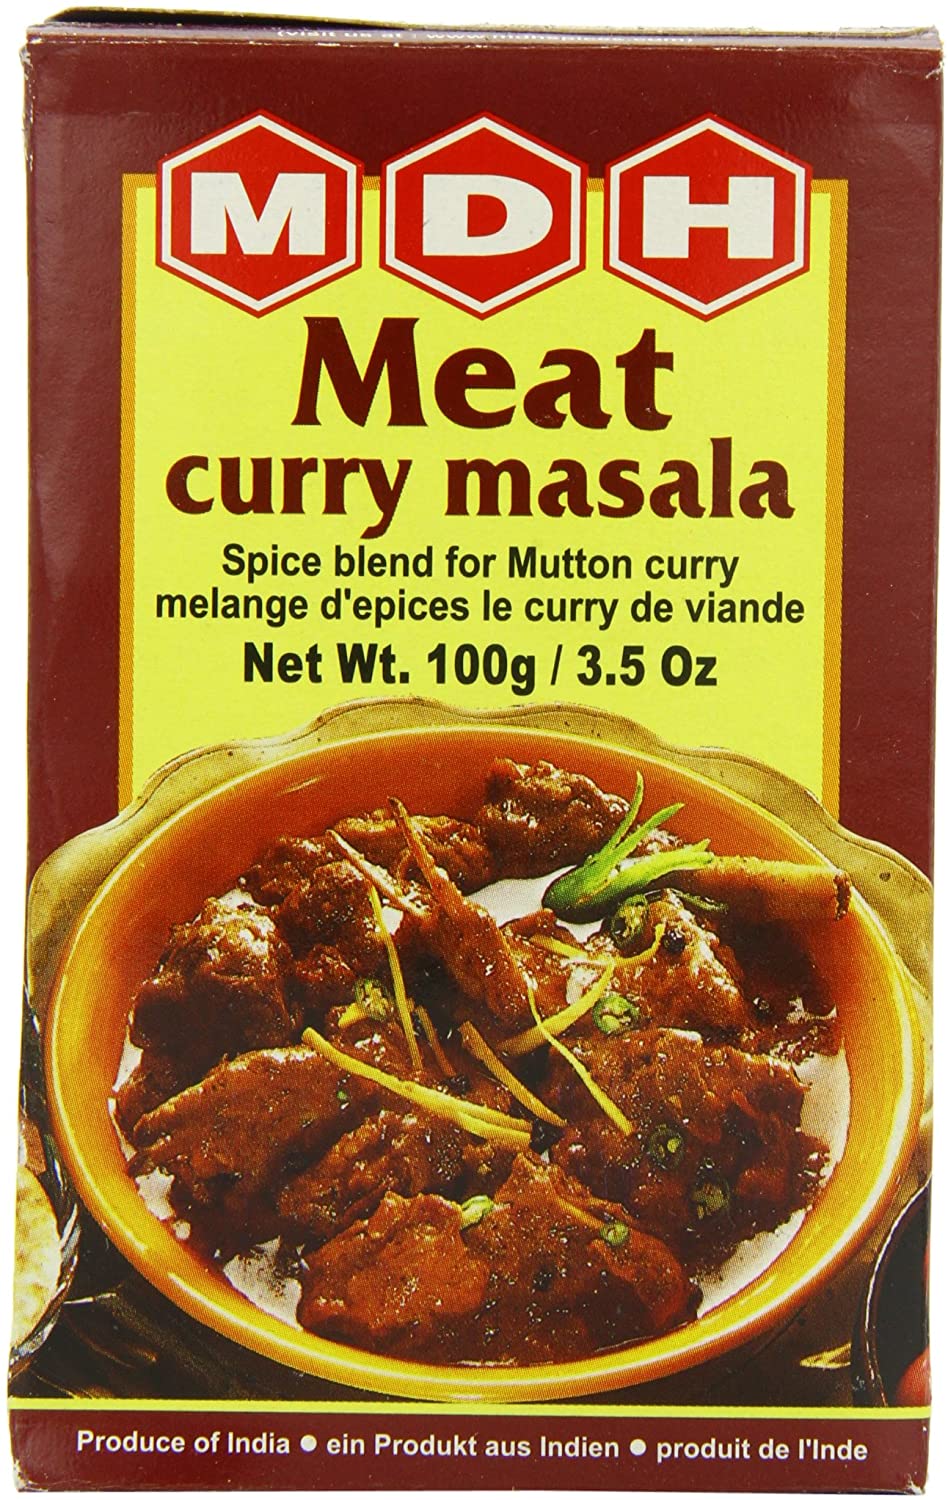 MDH Meat Curry Masala 100g[Each]